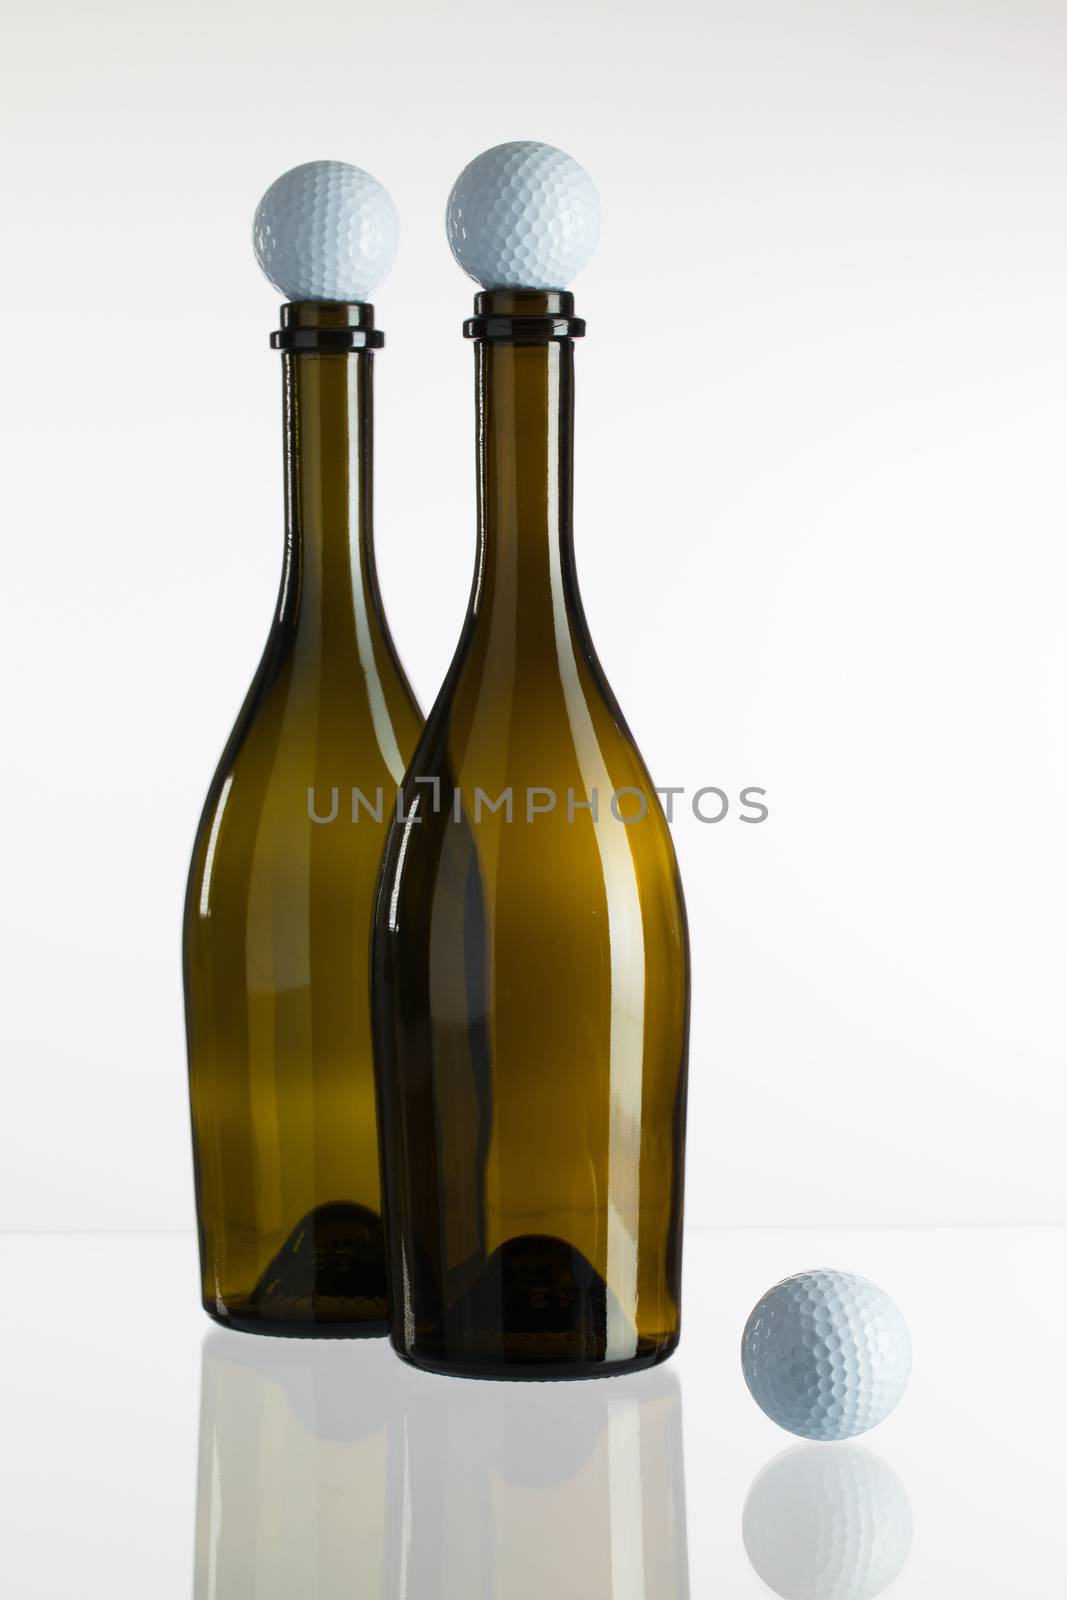 Empty wine bottles and golf balls on a glass desk by CaptureLight